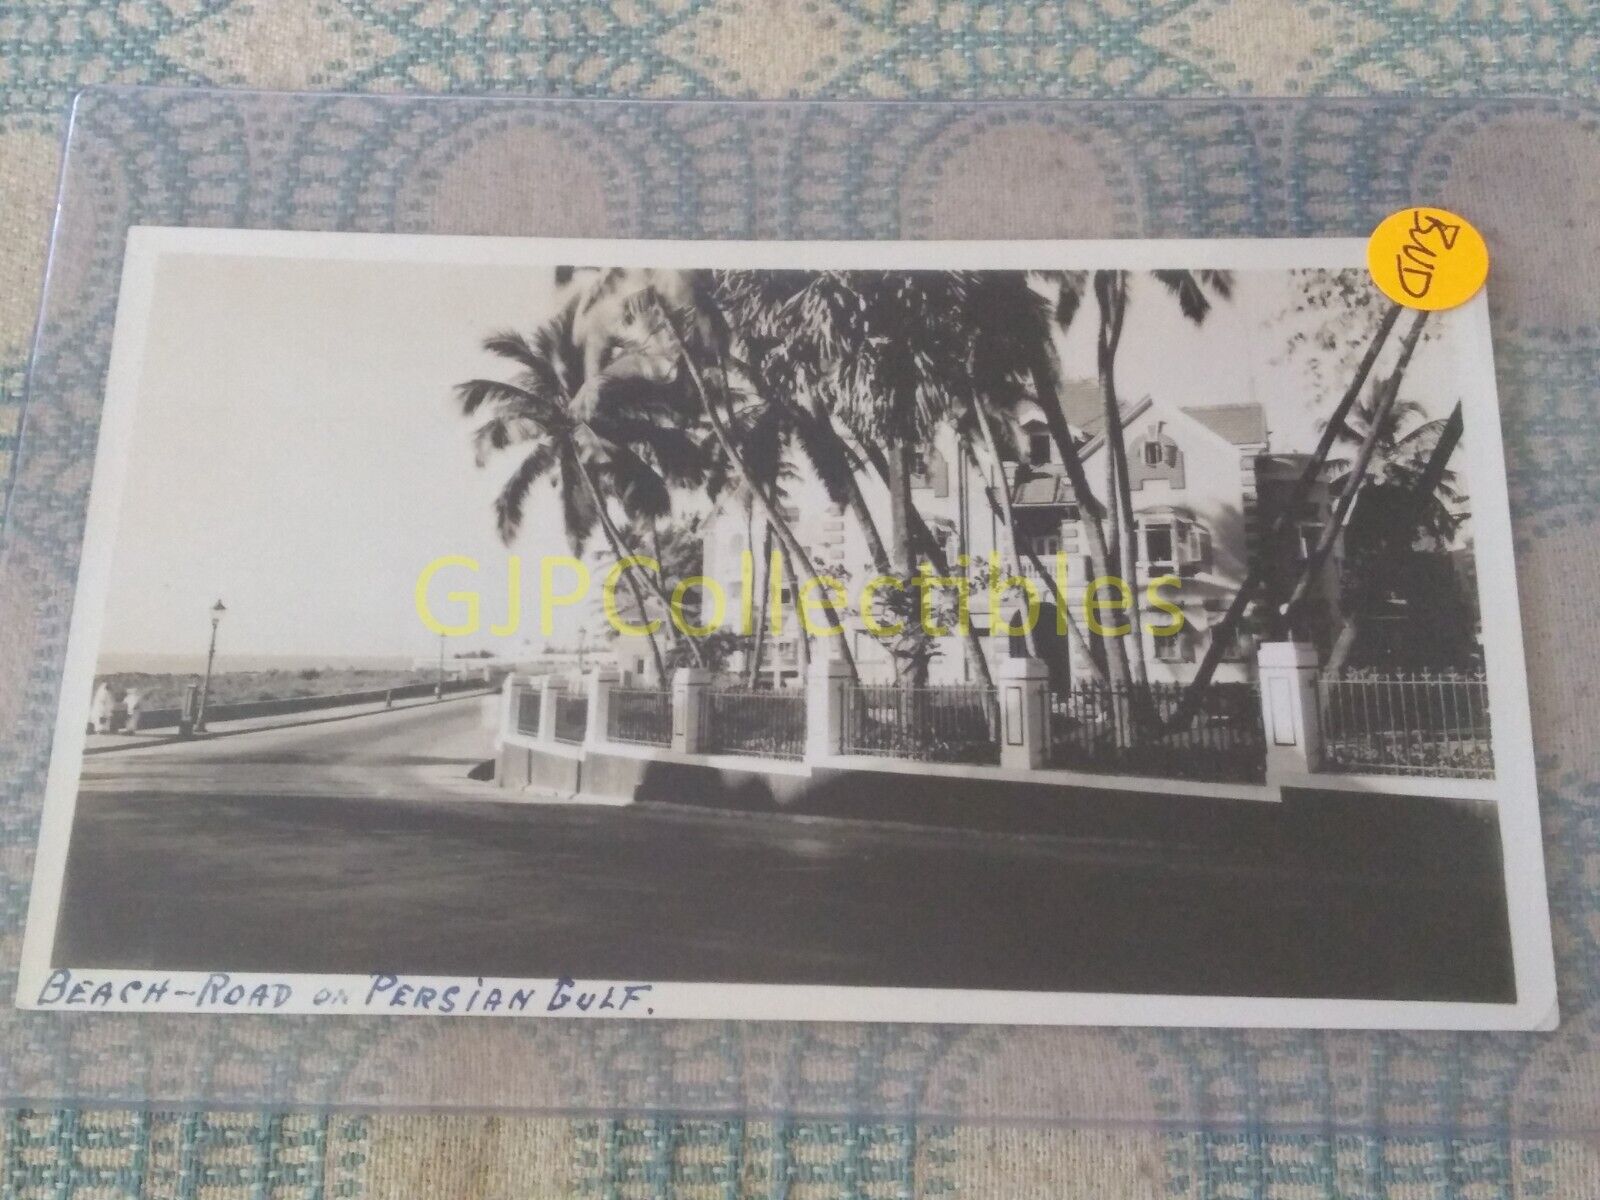 BND VINTAGE PHOTOGRAPH Spencer Lionel Adams BEACH ROAD ON PERSIAN GULF